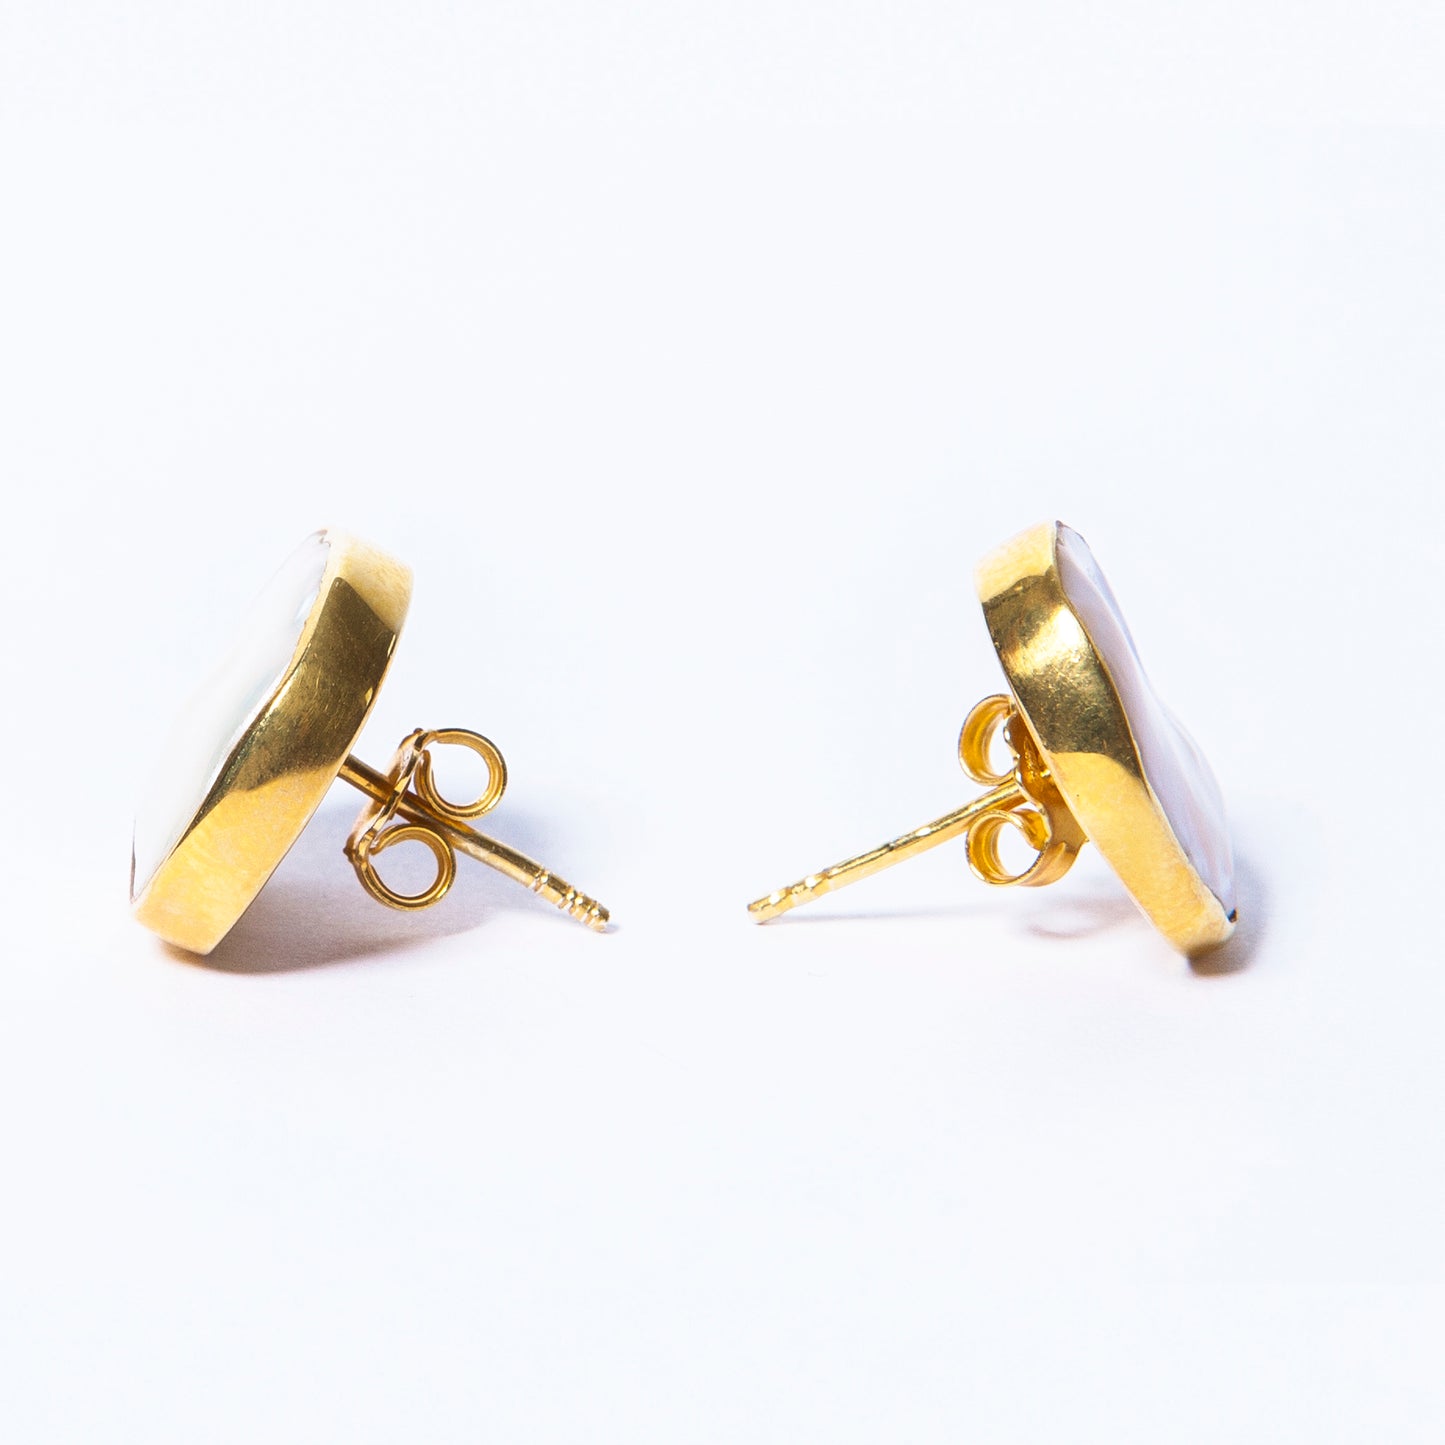 Natural Keishi Pearl Stud Earrings in Silver 925 with 18kt Gold Plate